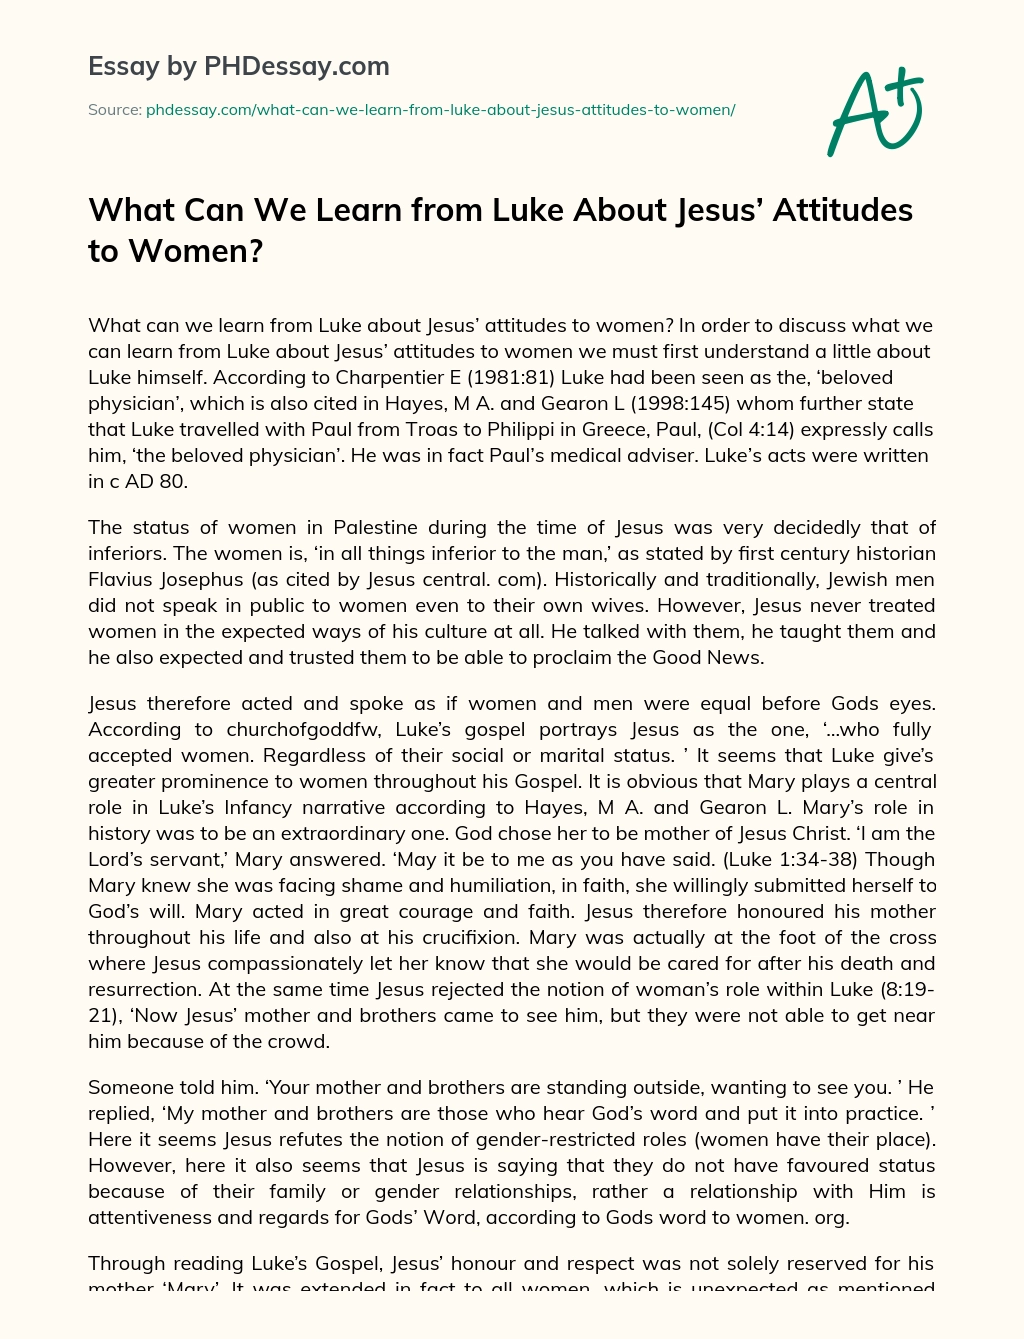 What Can We Learn from Luke About Jesus’ Attitudes to Women? essay